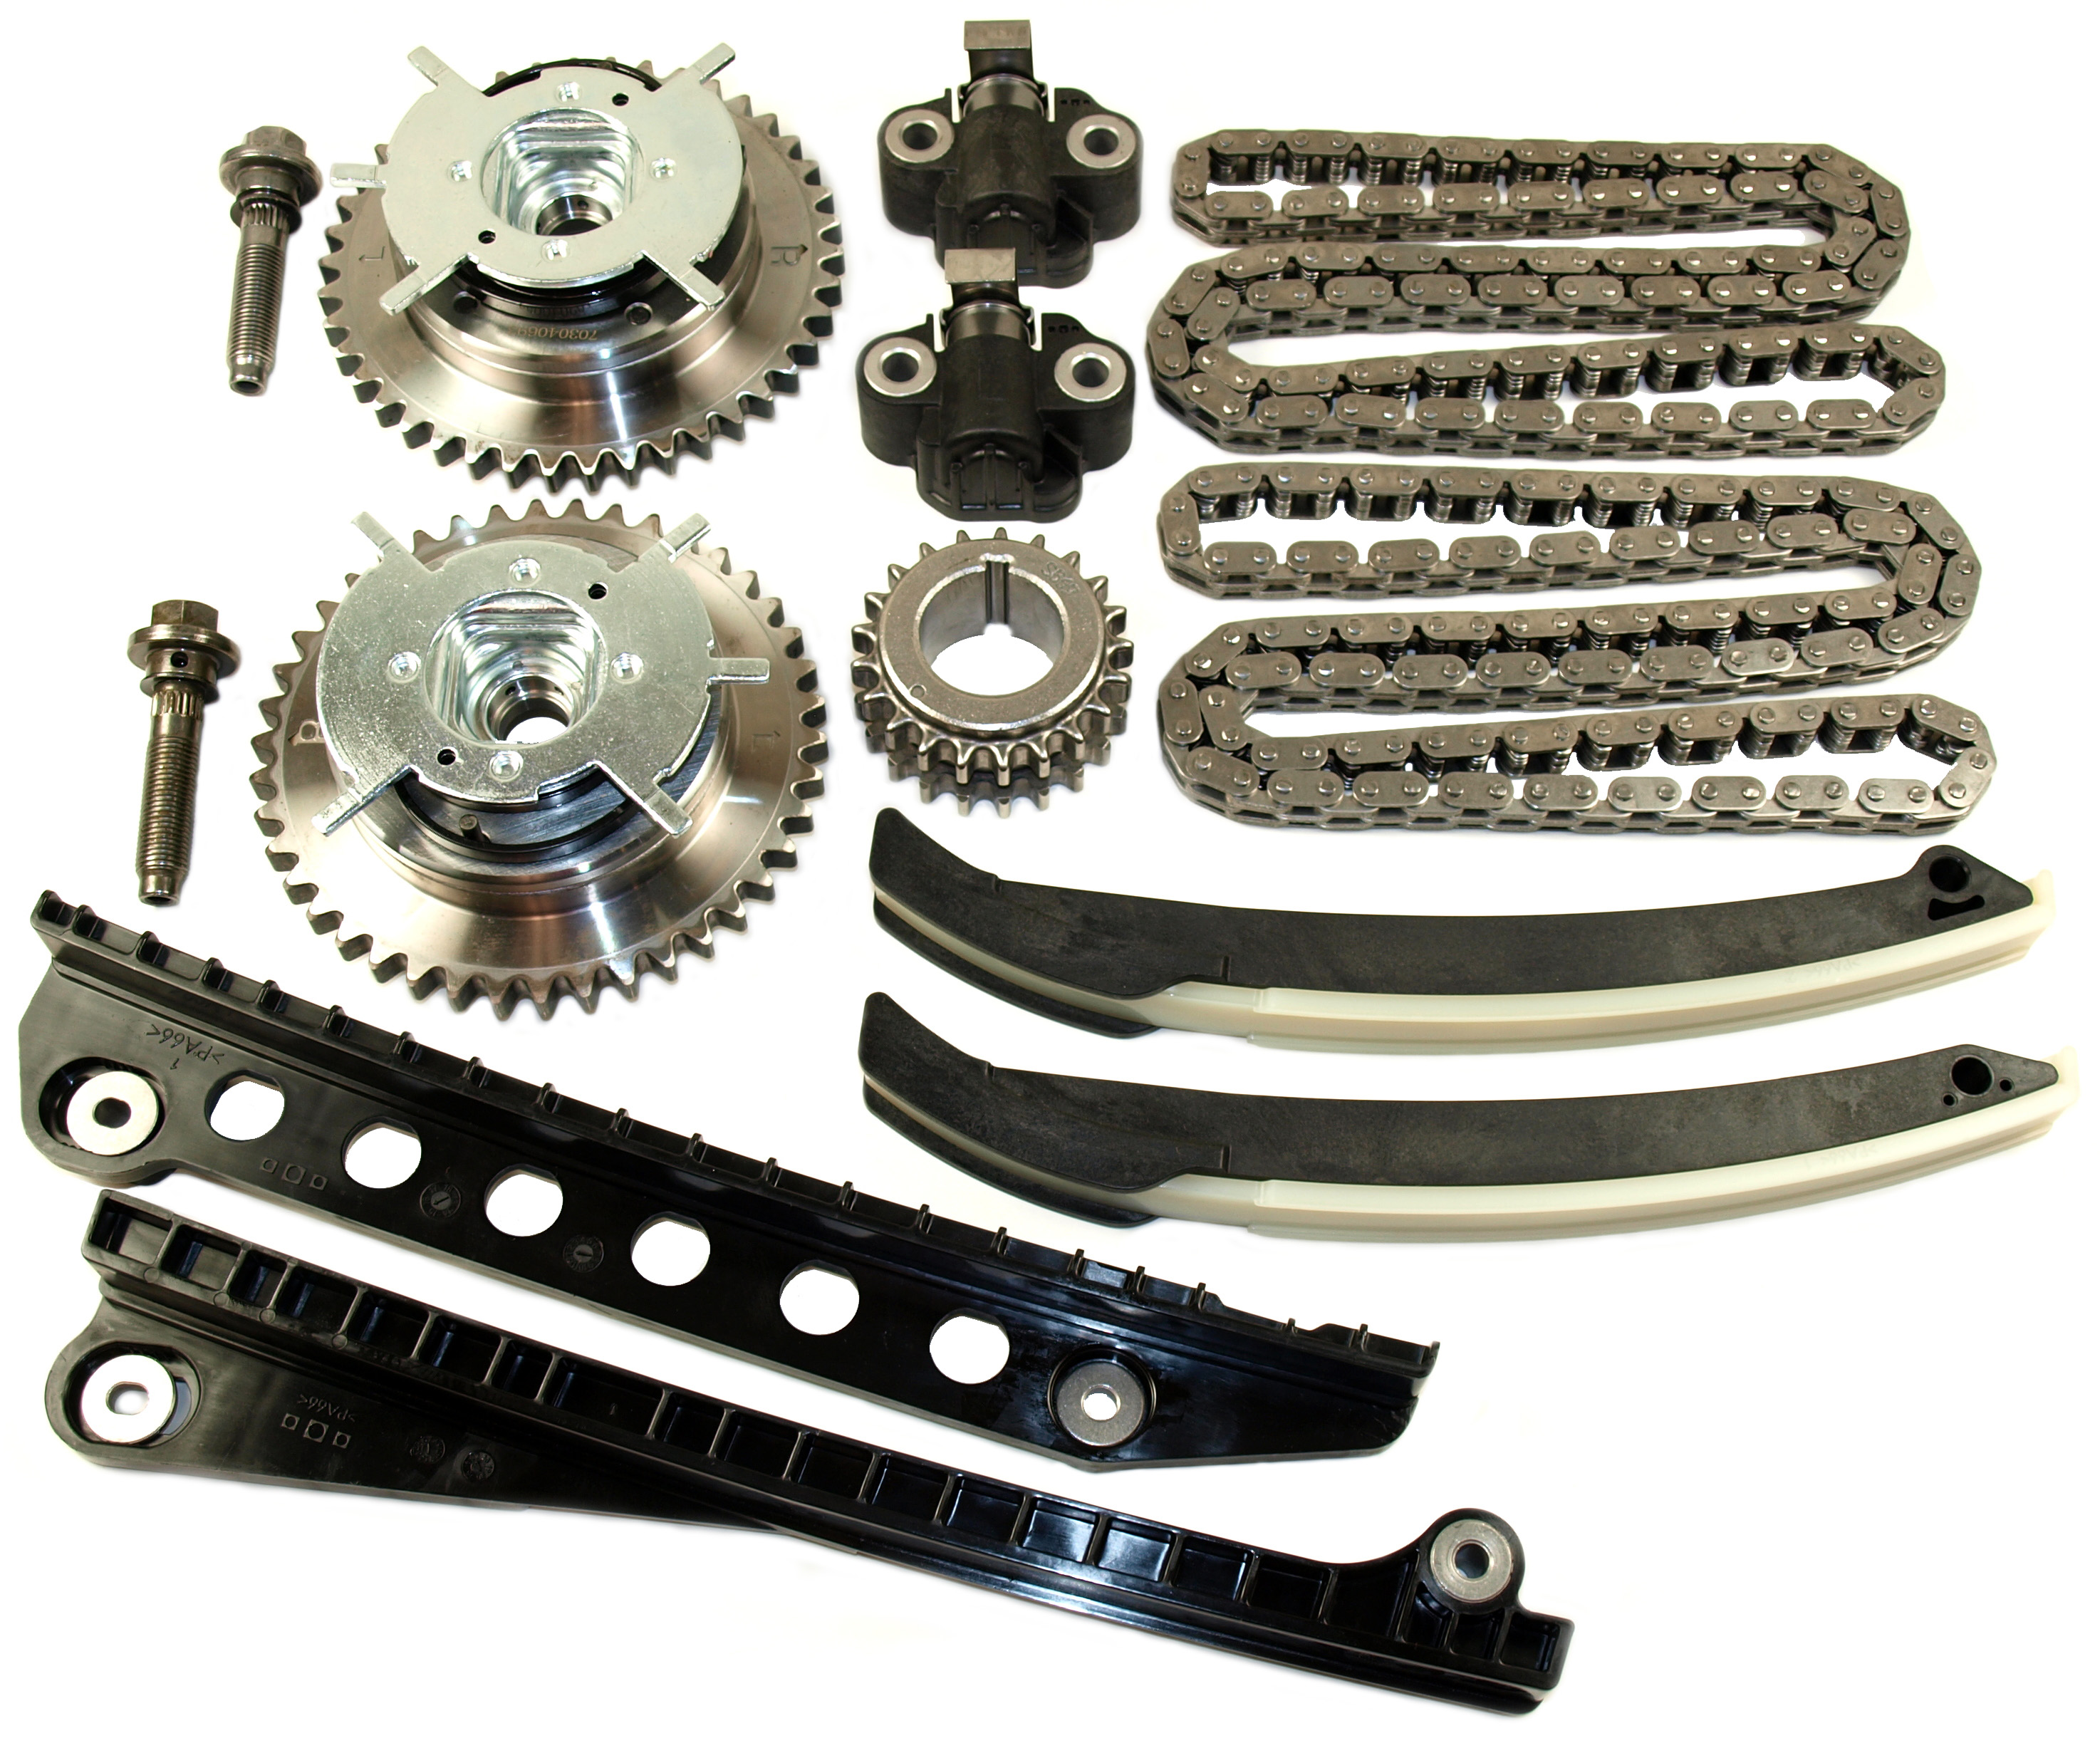 Variable valve timing chain kits for high mileage vehicles